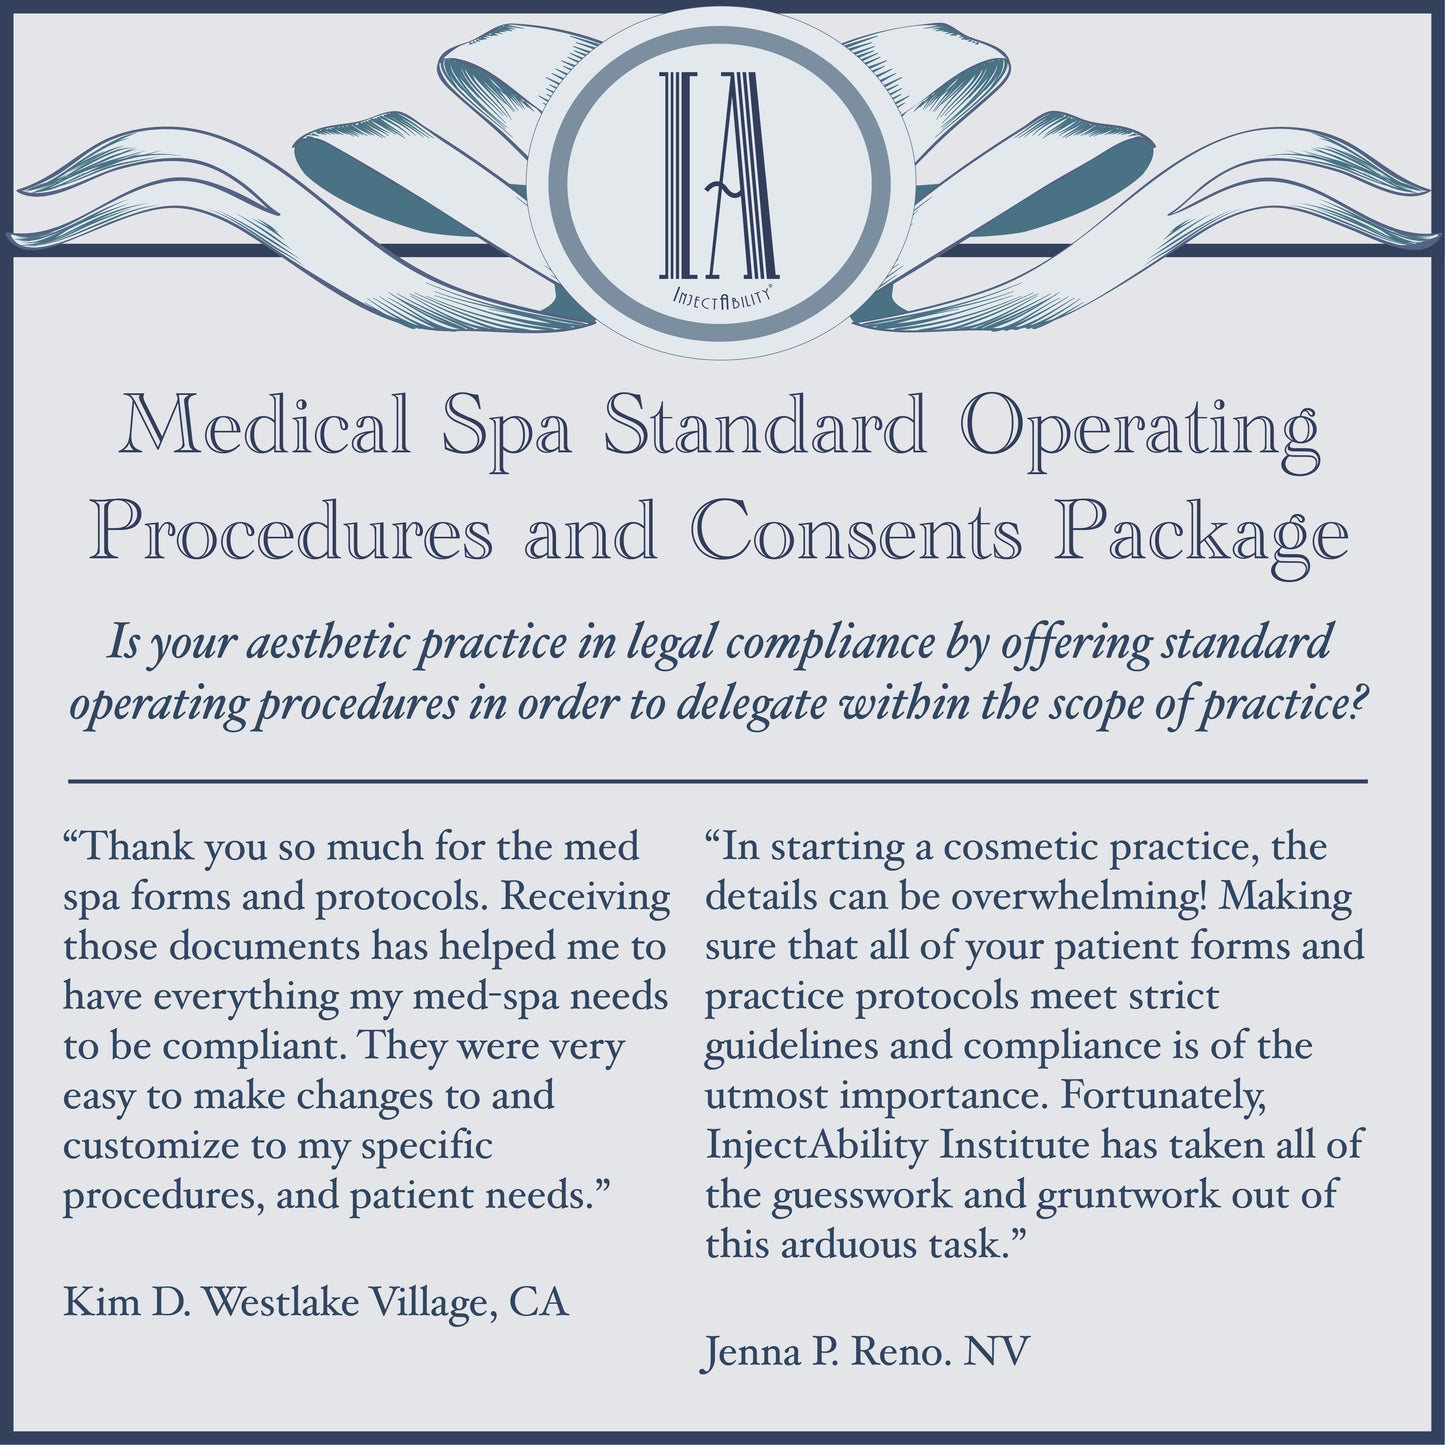 Medical Spa Standard Operating Procedures and Consents Package